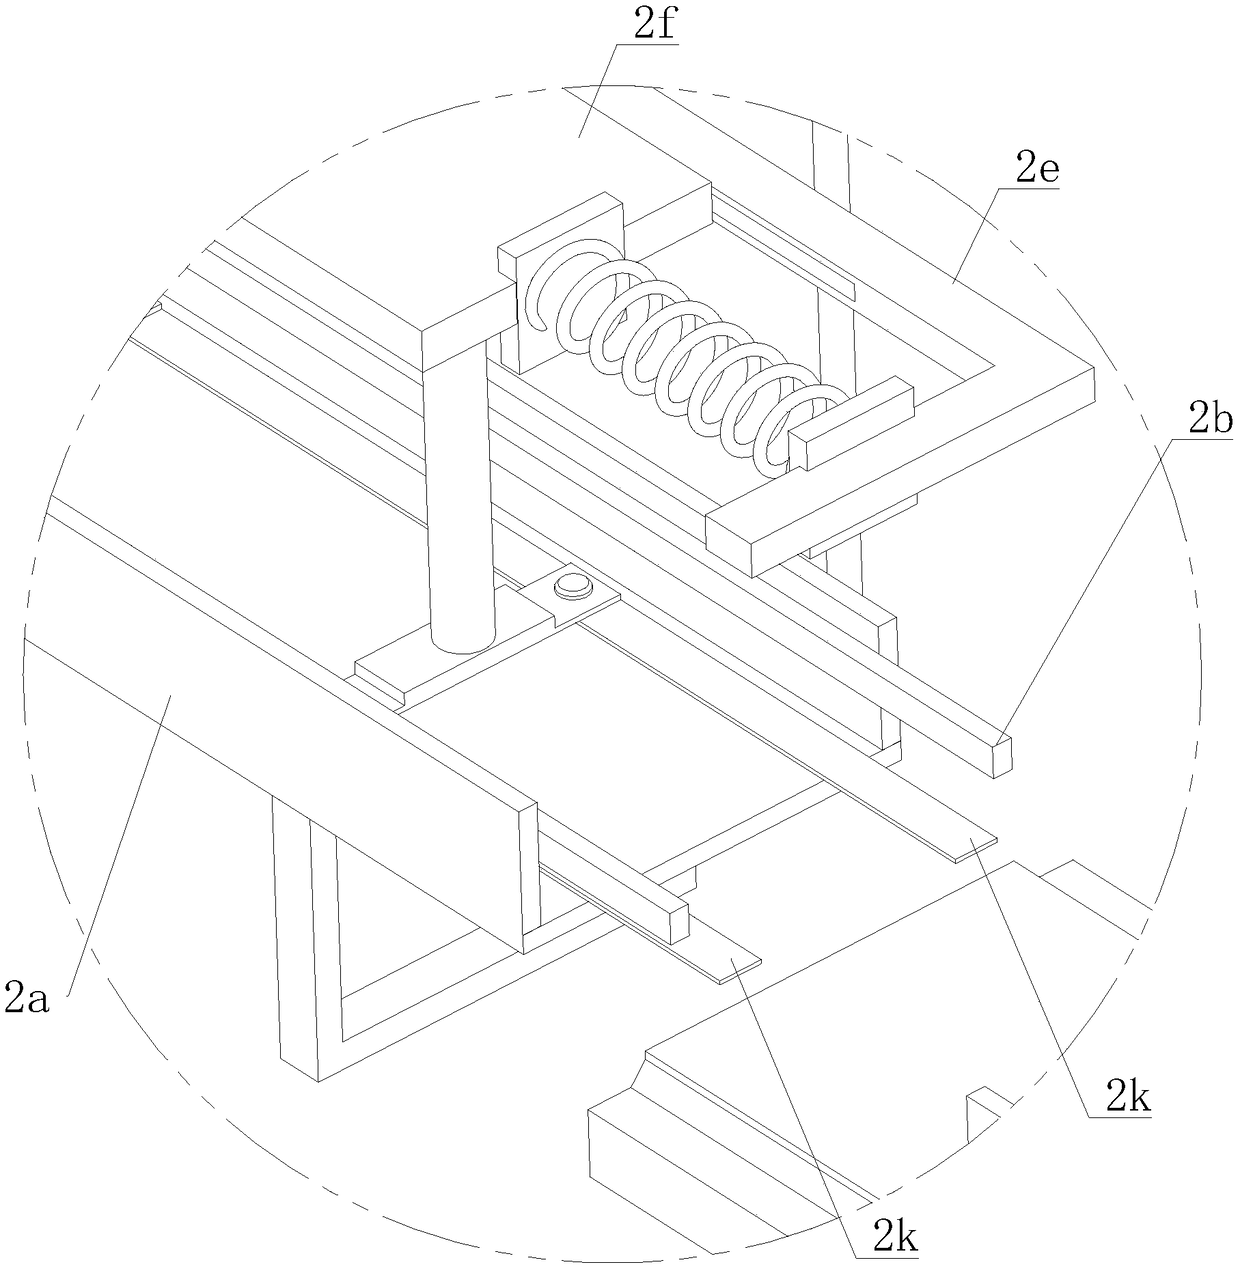 Automatic pattern cutting device for sleeve-fish and cutting method thereof